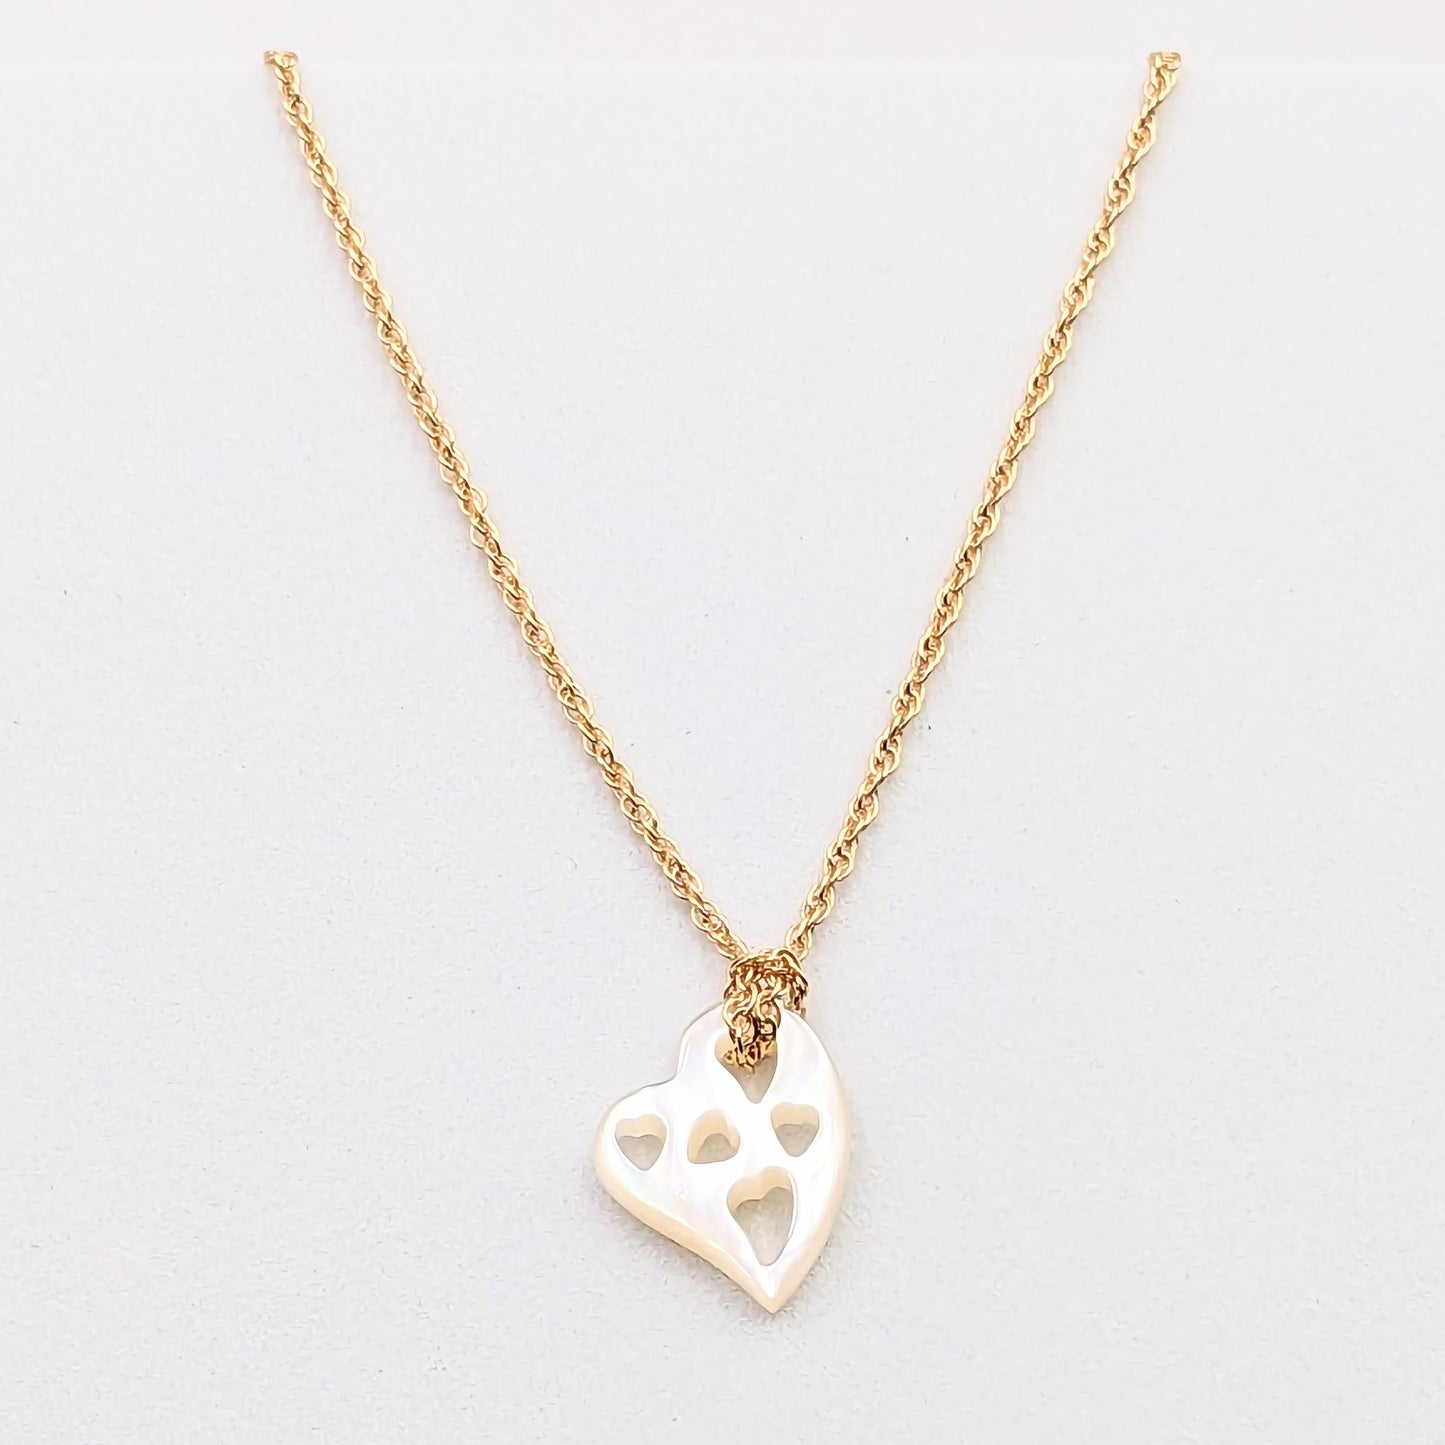 Full of Hearts Necklace